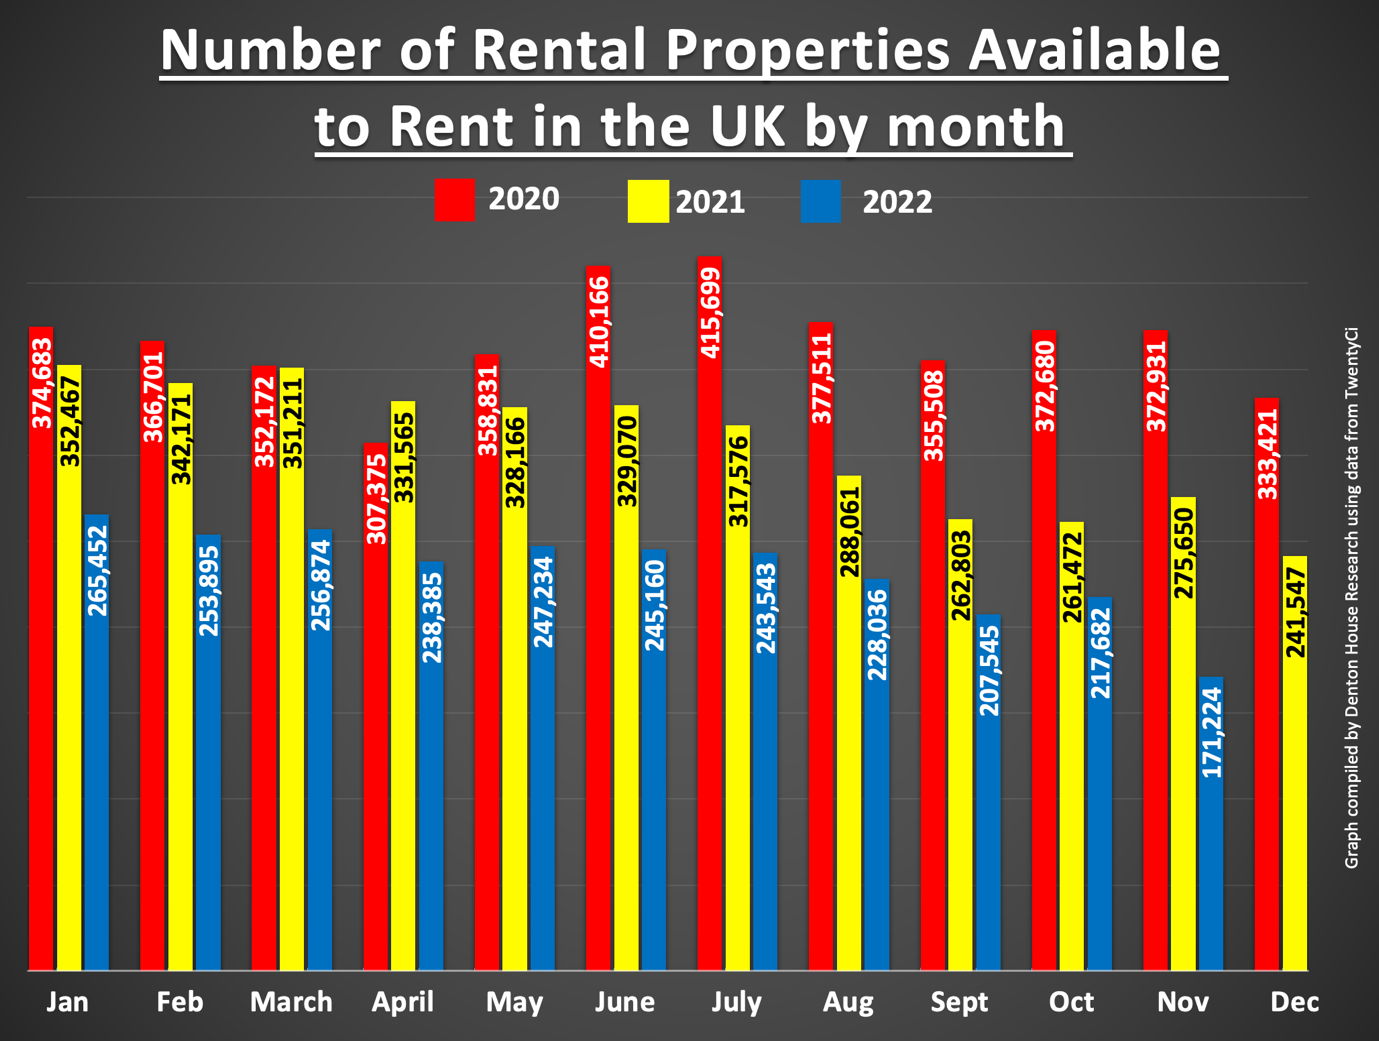 Number of Rental Properties Available to Rent in the UK by Month